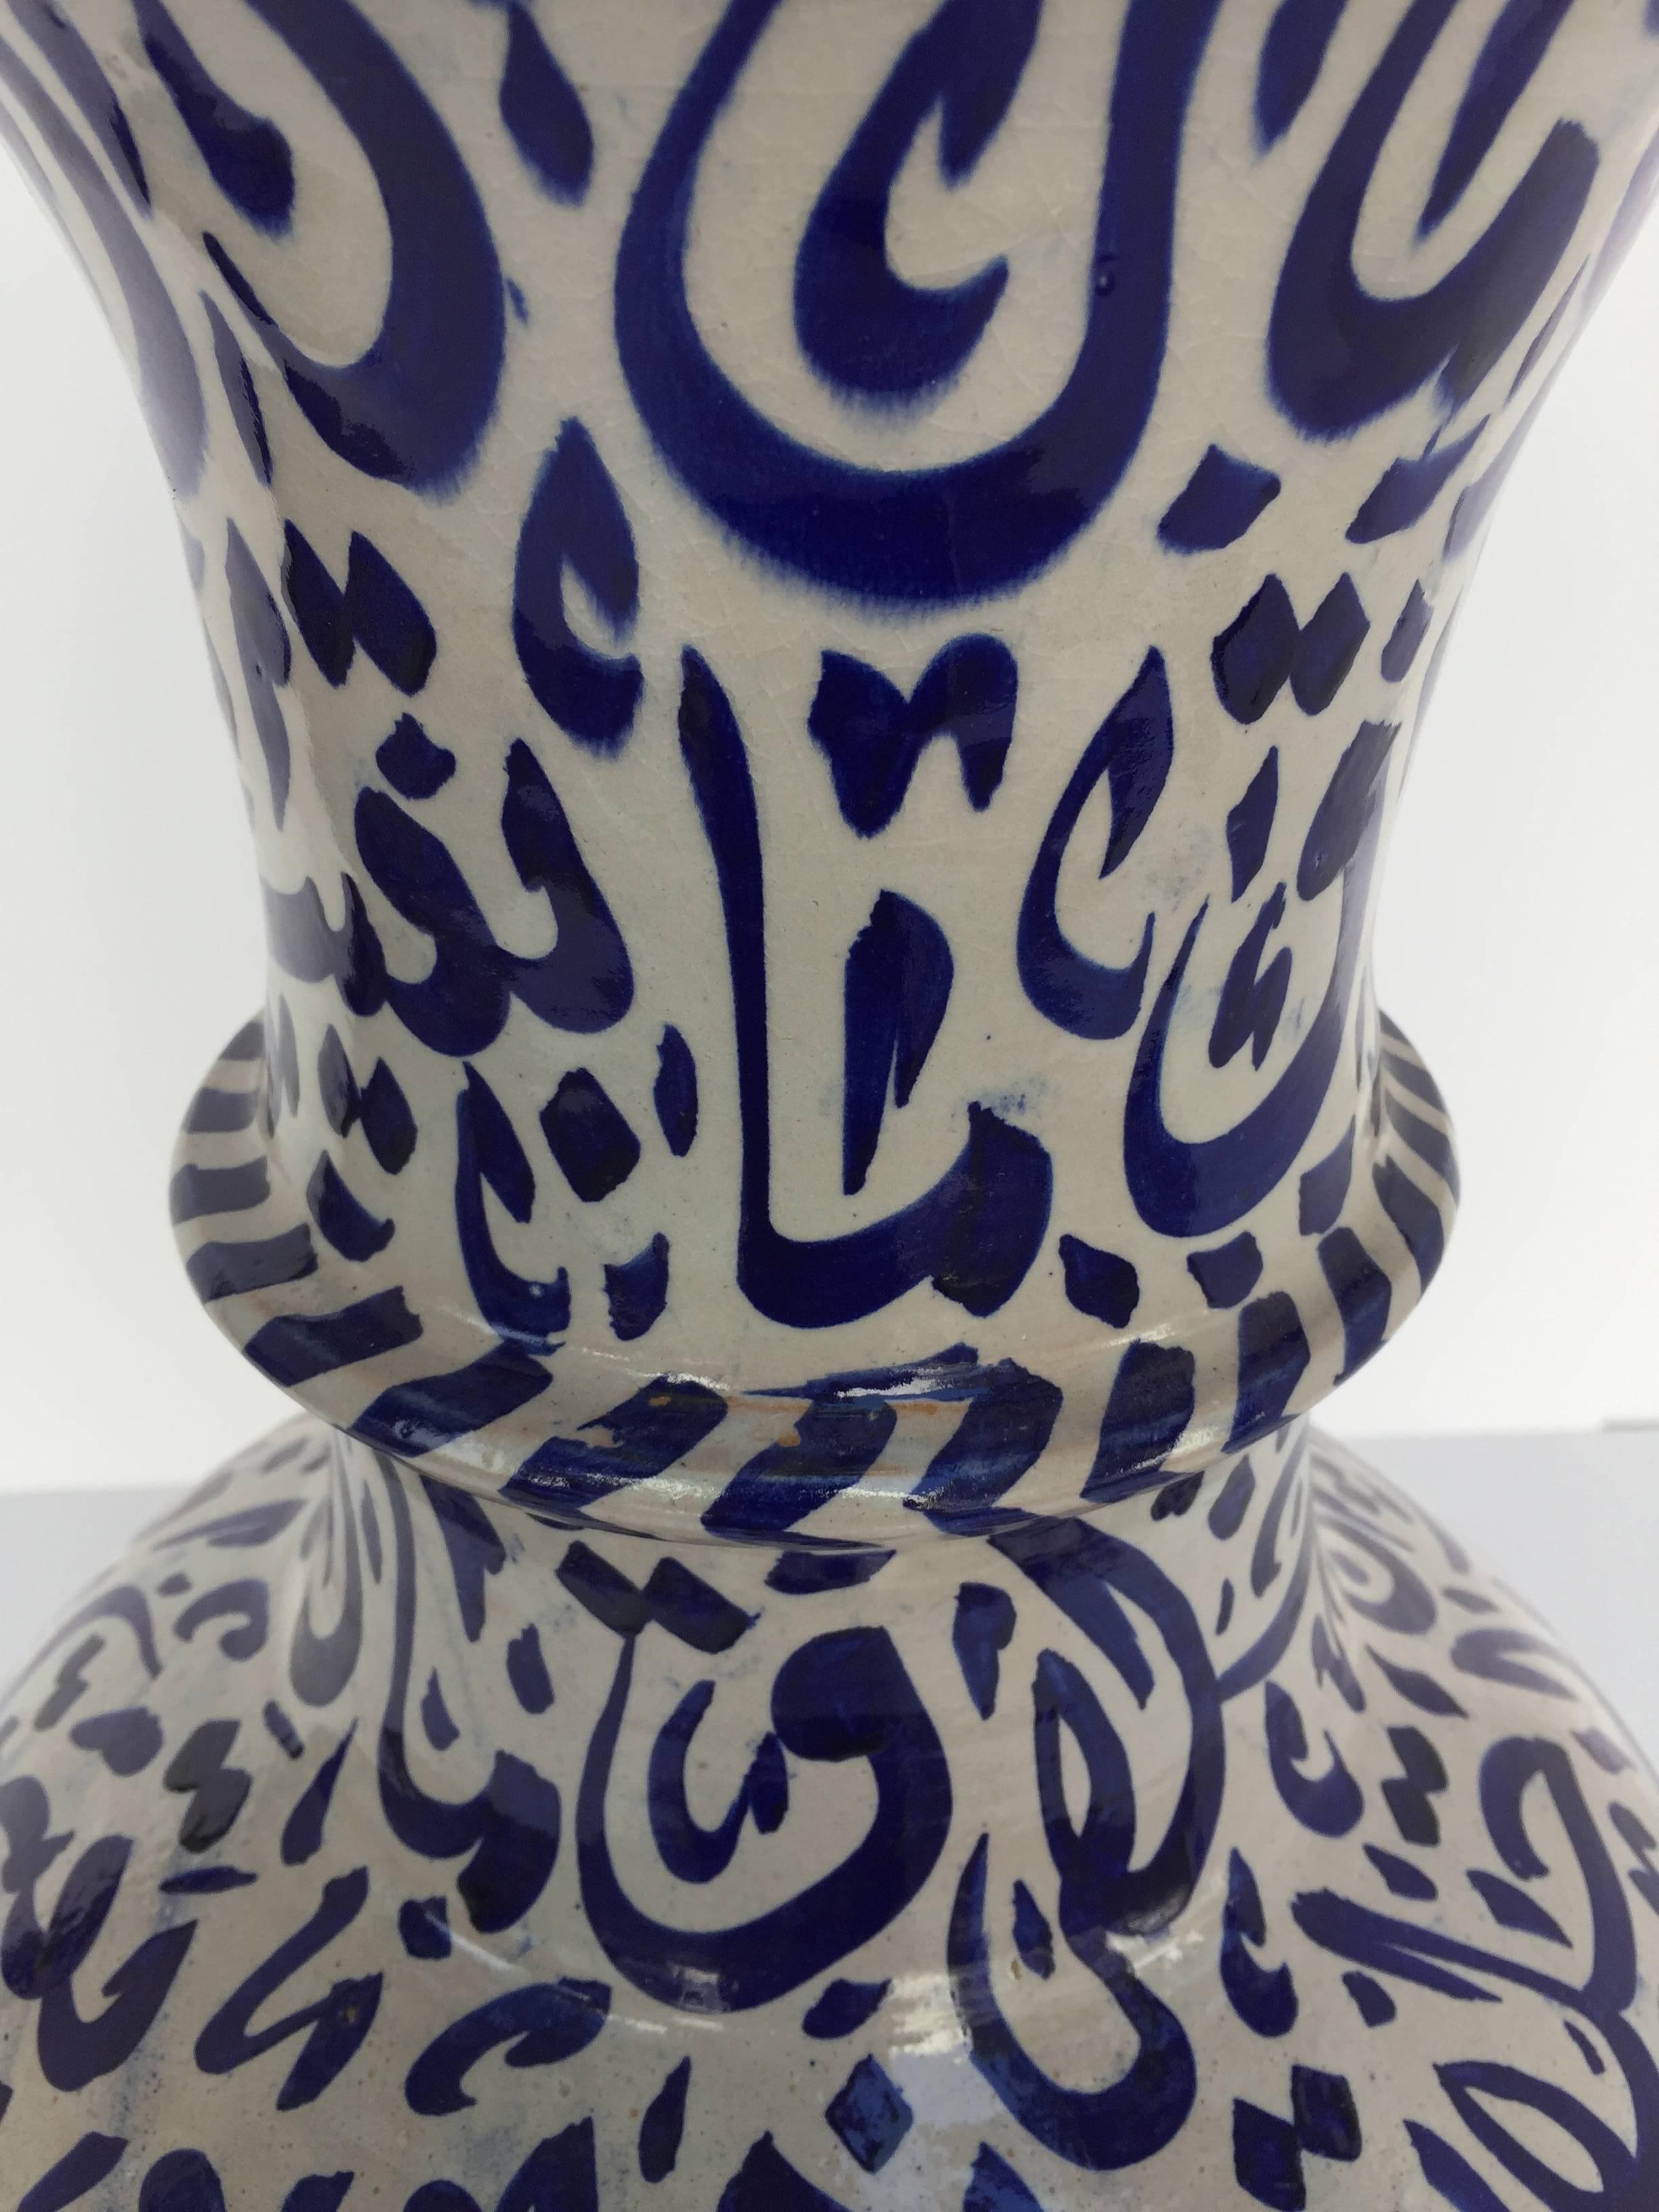 Large Moroccan Ceramic Vase from Fez with Blue Calligraphy Writing (Maurisch)